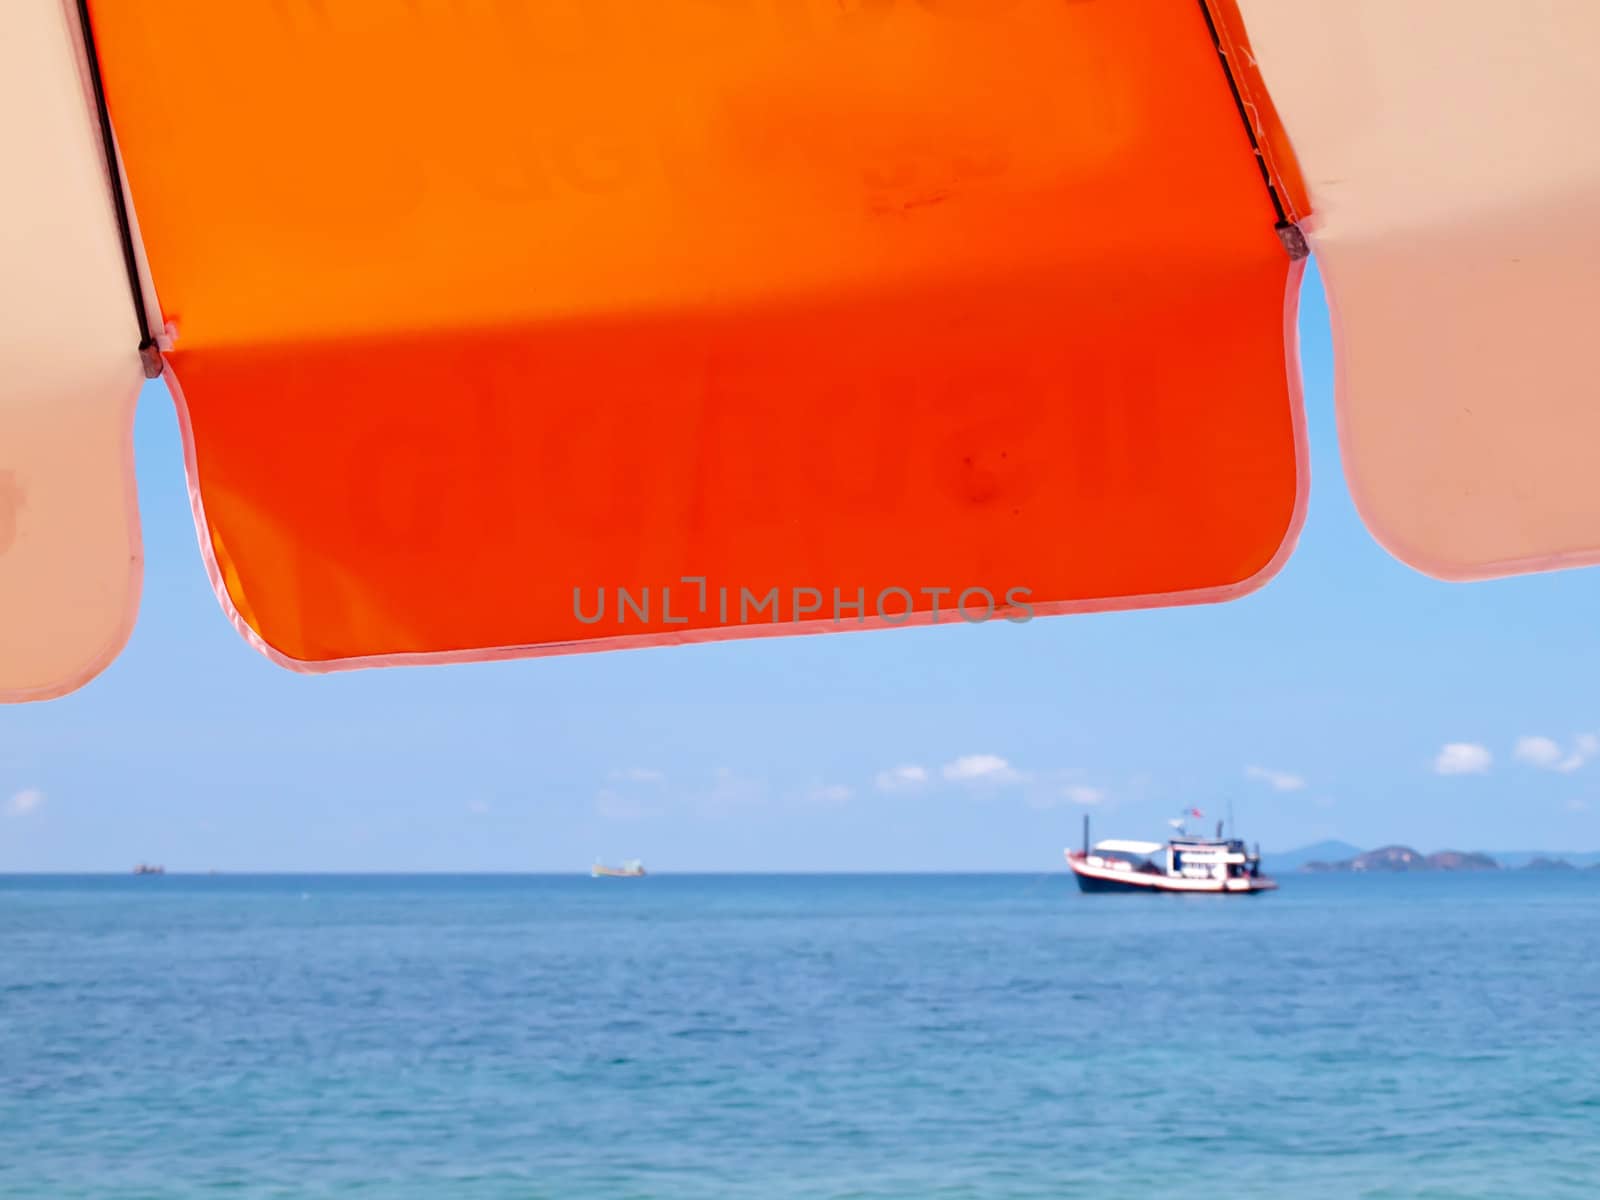 Sunshade with boat by Exsodus